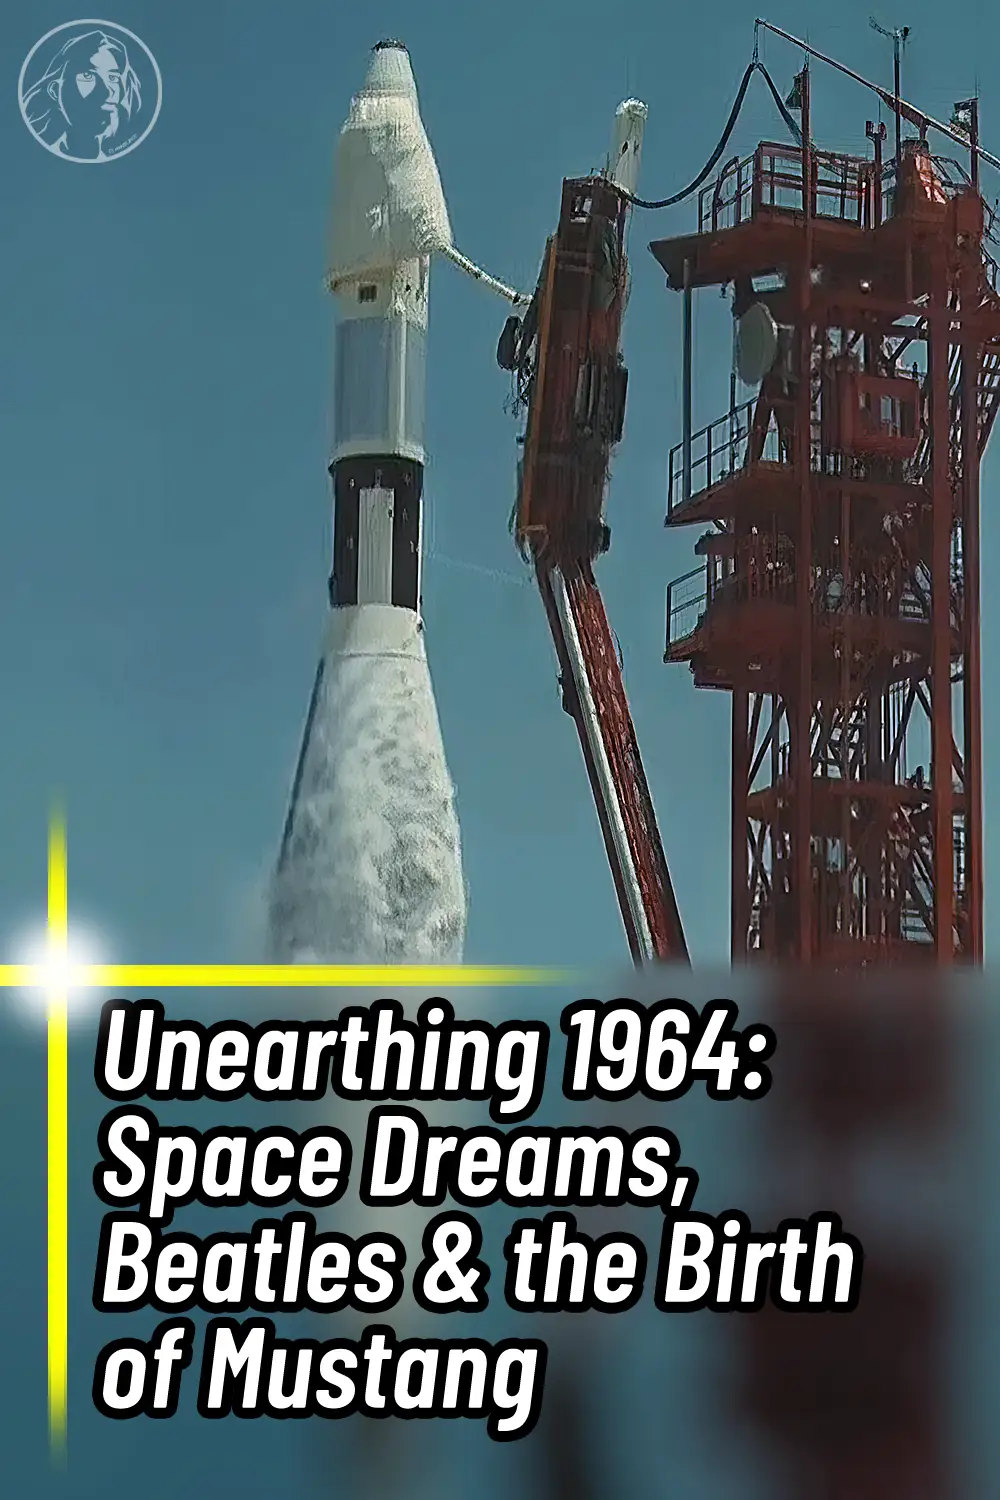 Unearthing 1964: Space Dreams, Beatles & the Birth of Mustang